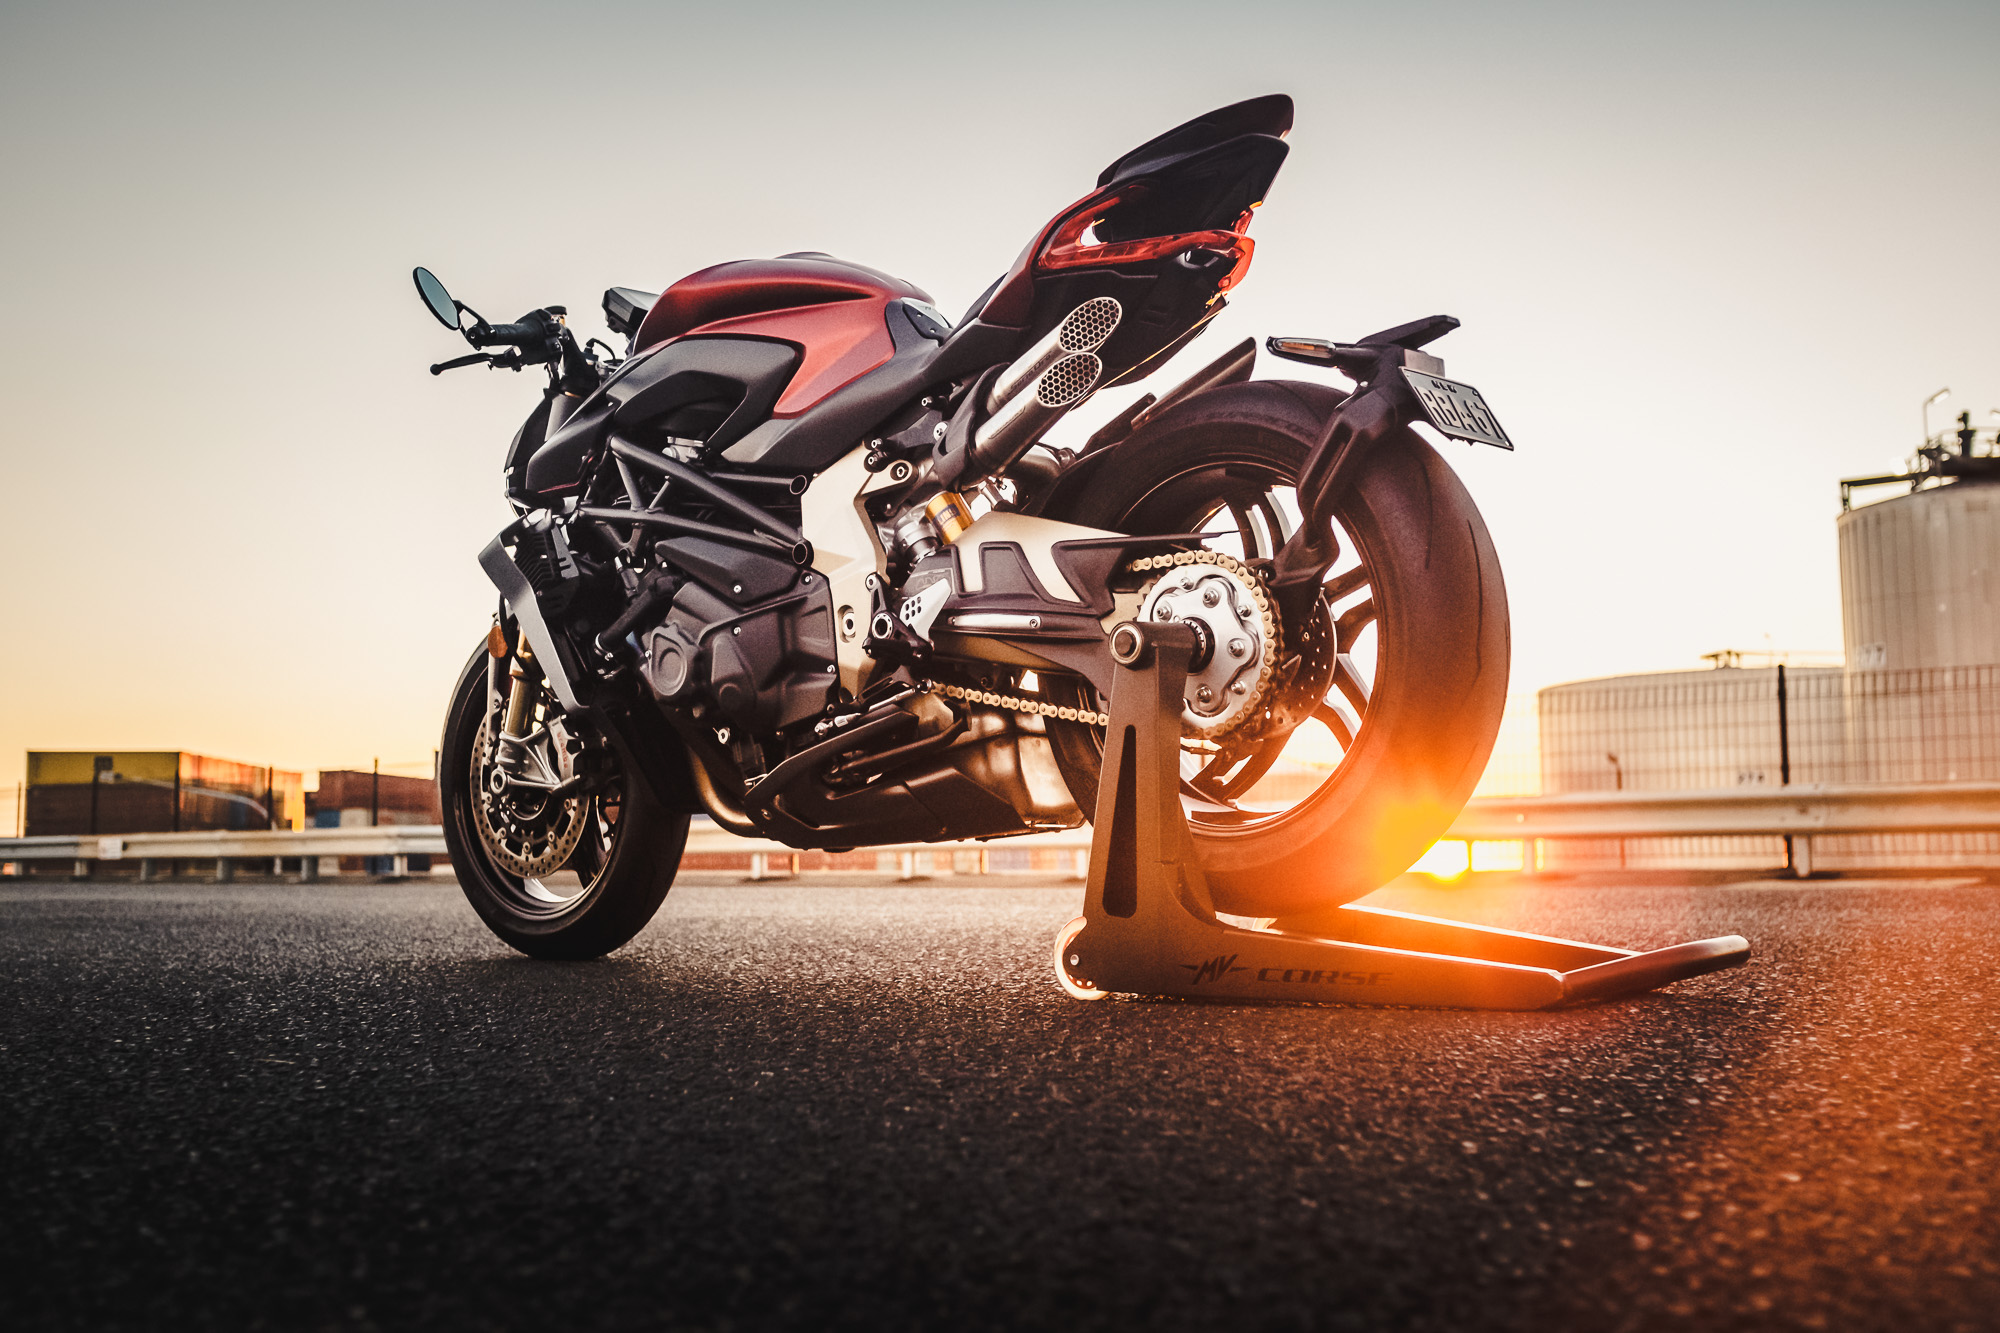 A MV Agusta Brutale motorcycle on an industrial road at sunset